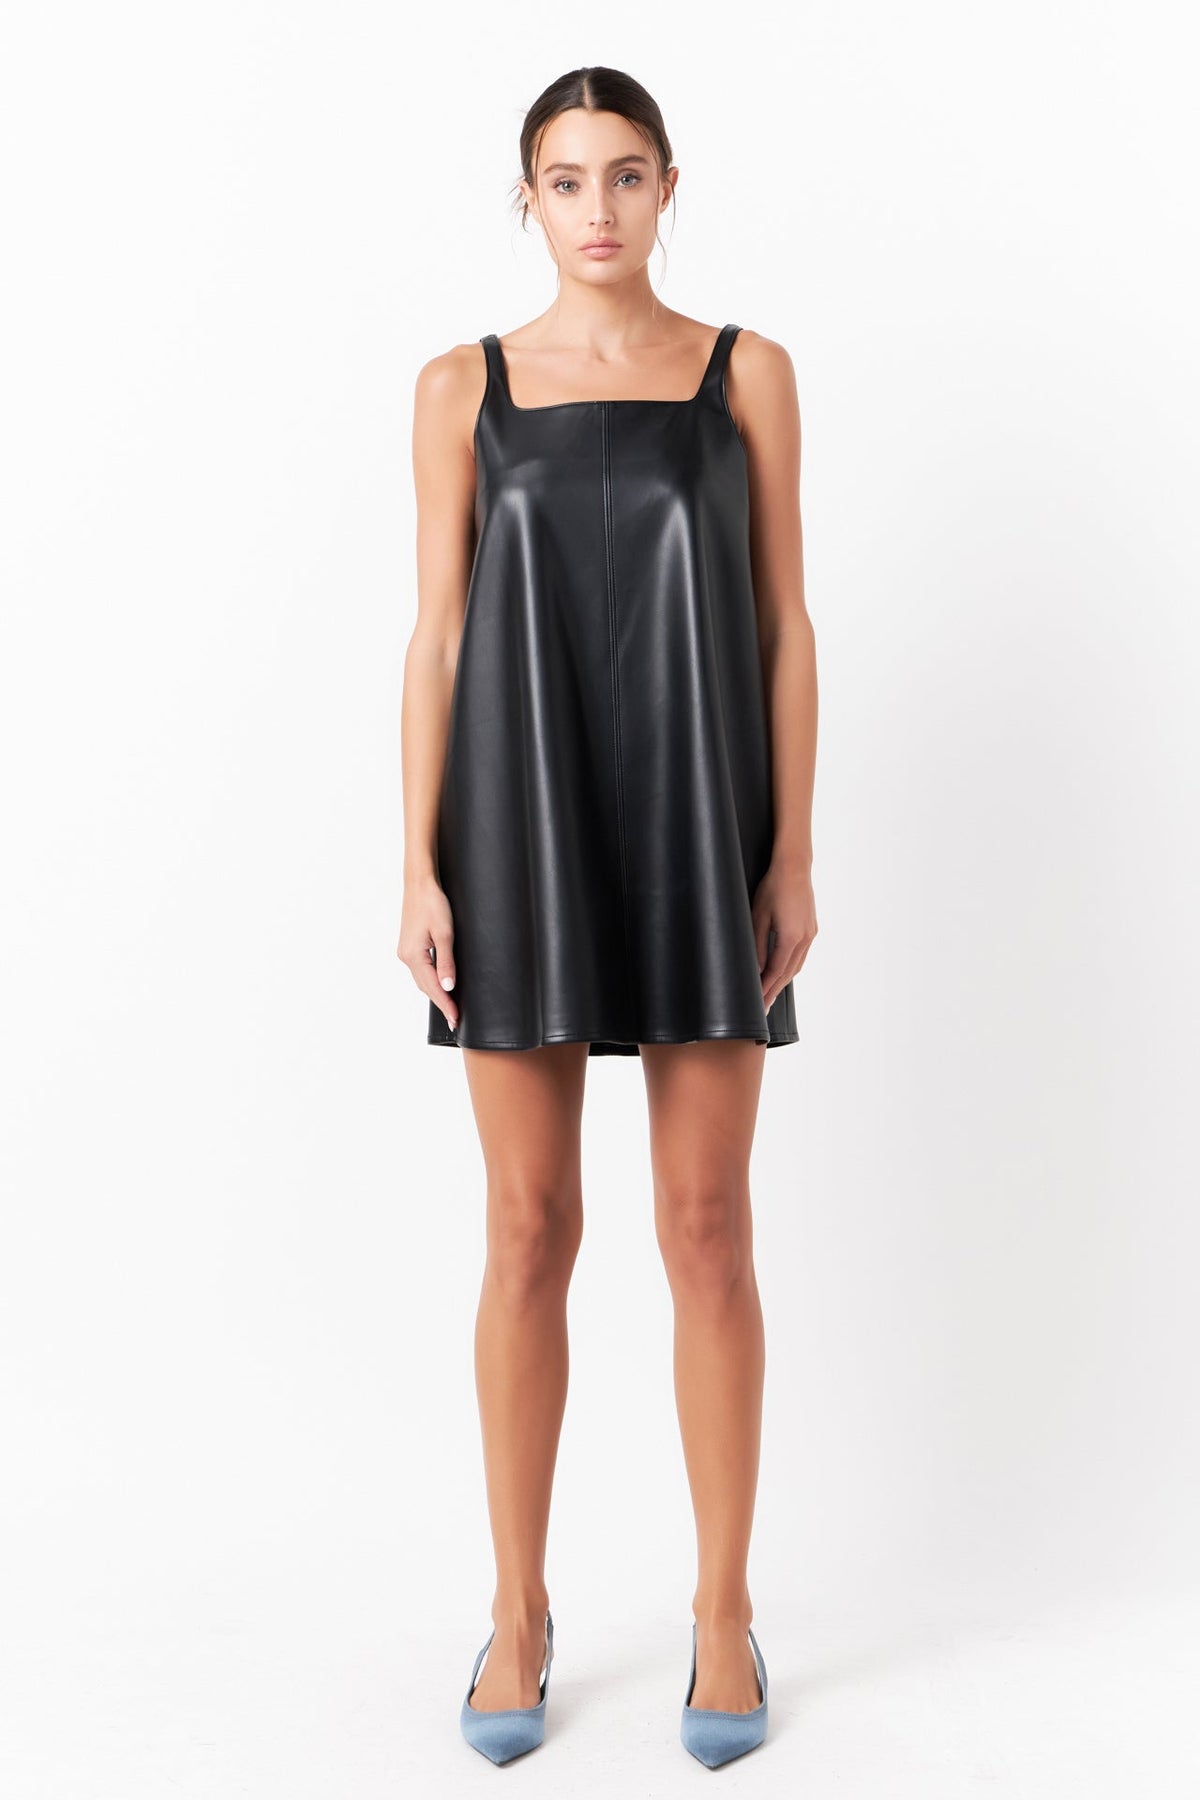 GREY LAB - Square Neck A-Line Mini Dress - DRESSES available at Objectrare